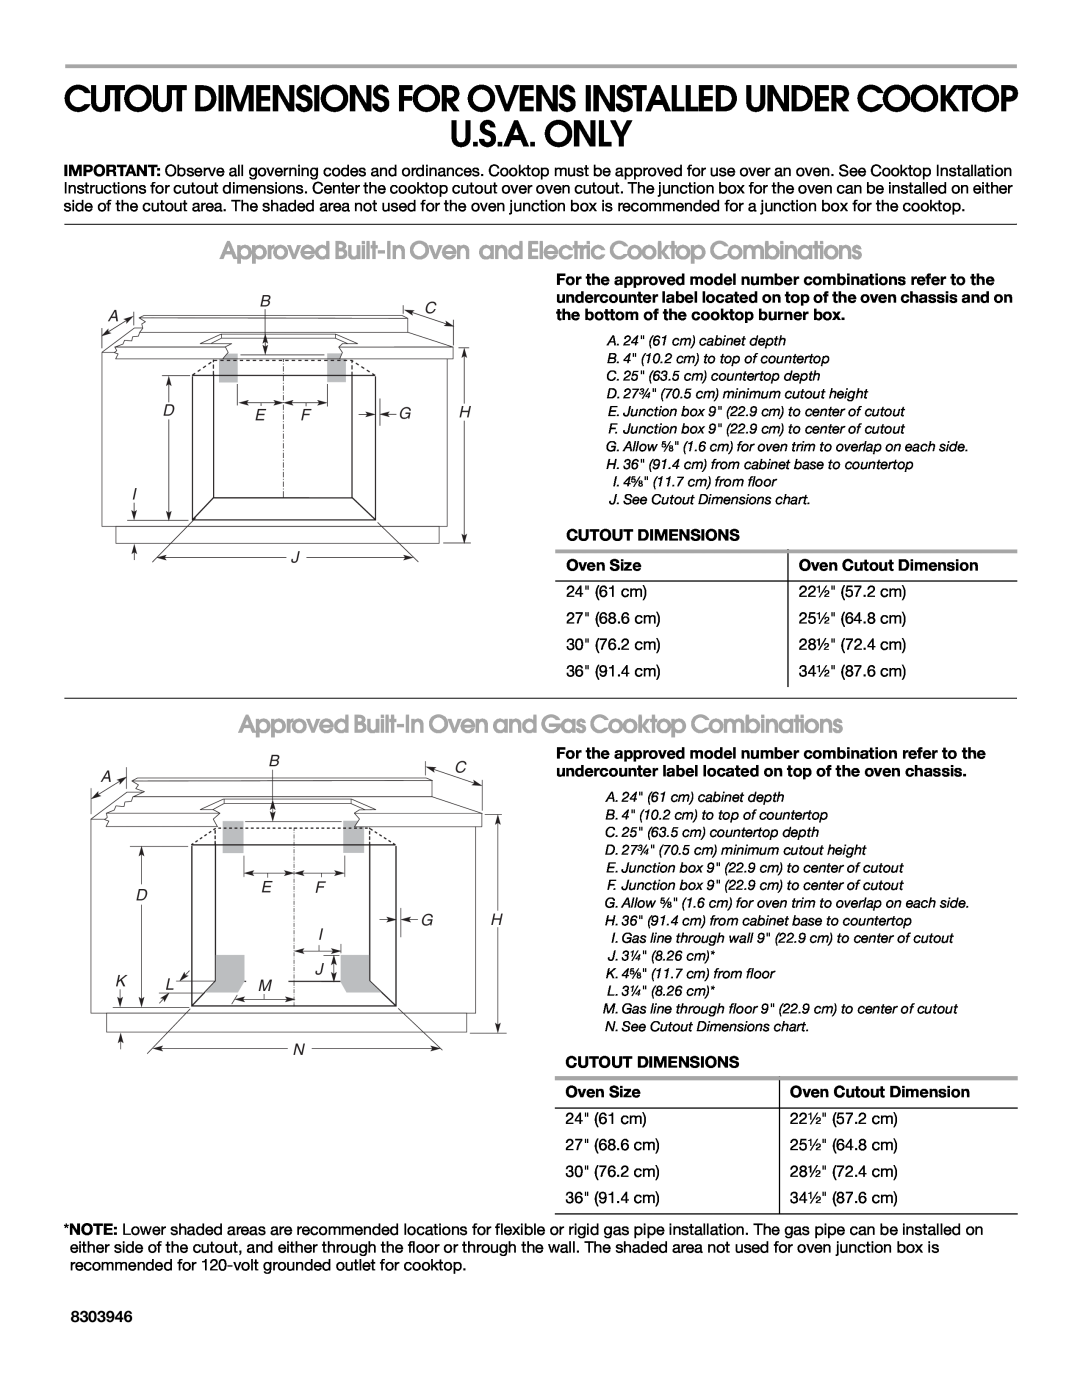 KitchenAid 288 U.S.A. Only, Cutout Dimensions For Ovens Installed Under Cooktop, 8303946, 24 61 cm, 22 ¹⁄₂ 57.2 cm 